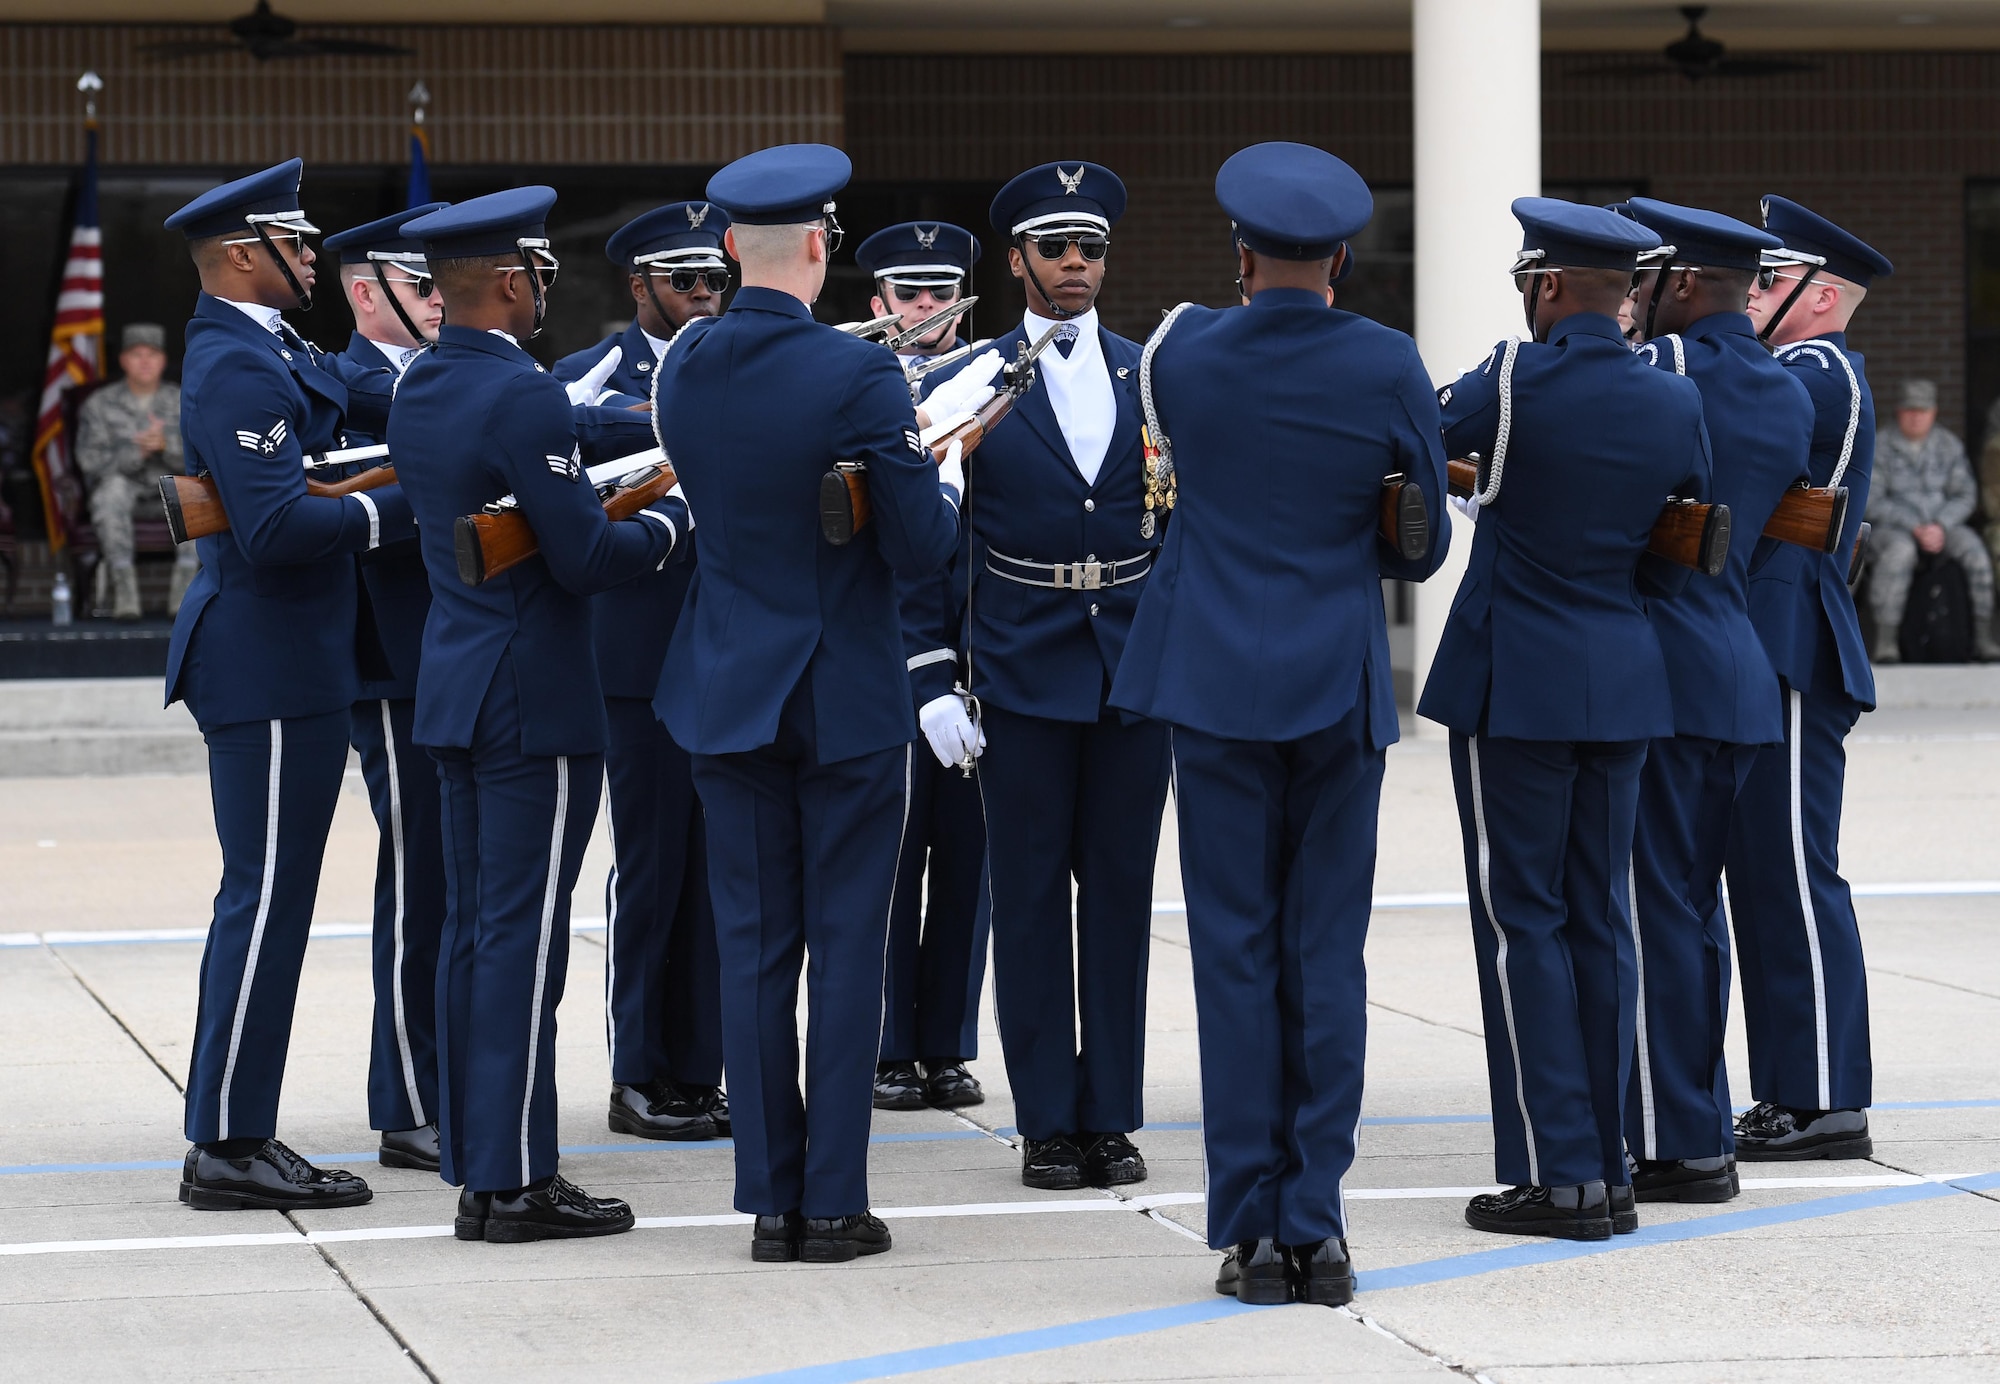 The U.S. Air Force Honor Guard Drill Team debuts their 2019 routine in front of Keesler leadership and 81st Training Group Airmen on the Levitow Training Support Facility drill pad at Keesler Air Force Base, Mississippi, Feb. 8, 2019. They are the nation's most elite honor guard, serving the President of the United States, the Air Force's most senior leaders and performing nationwide for the American public. The team comes to Keesler every year for five weeks to develop a new routine that they will use throughout the year. (U.S. Air Force photo by Kemberly Groue)